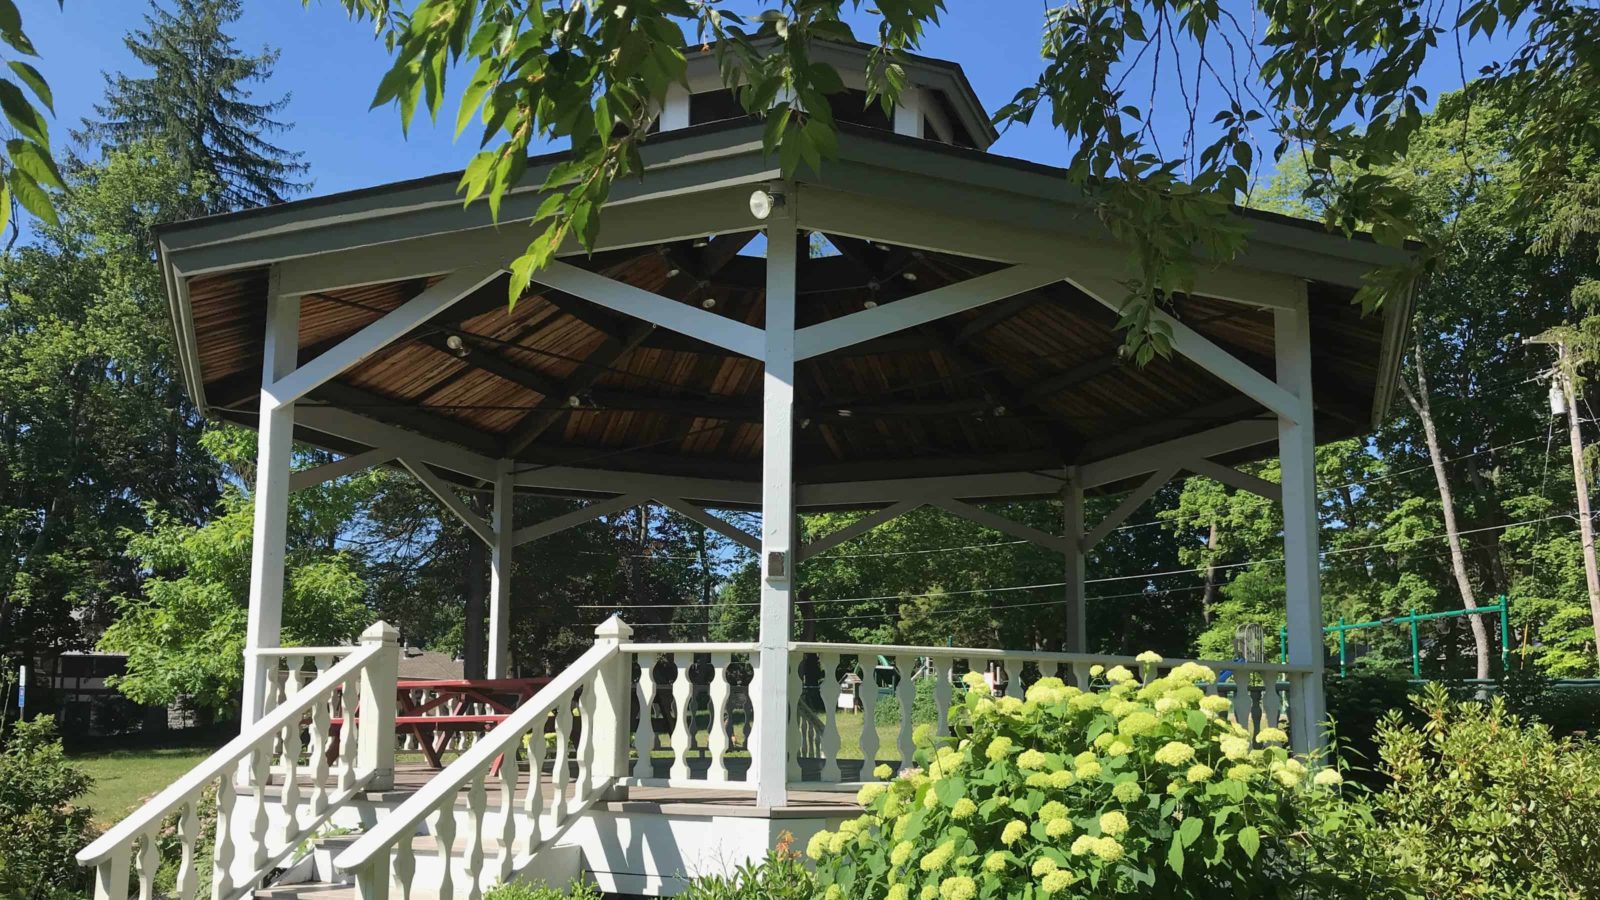 The gazebo in the park by the Great Barrington Town Hall stands offers shade on a sunny summer day.